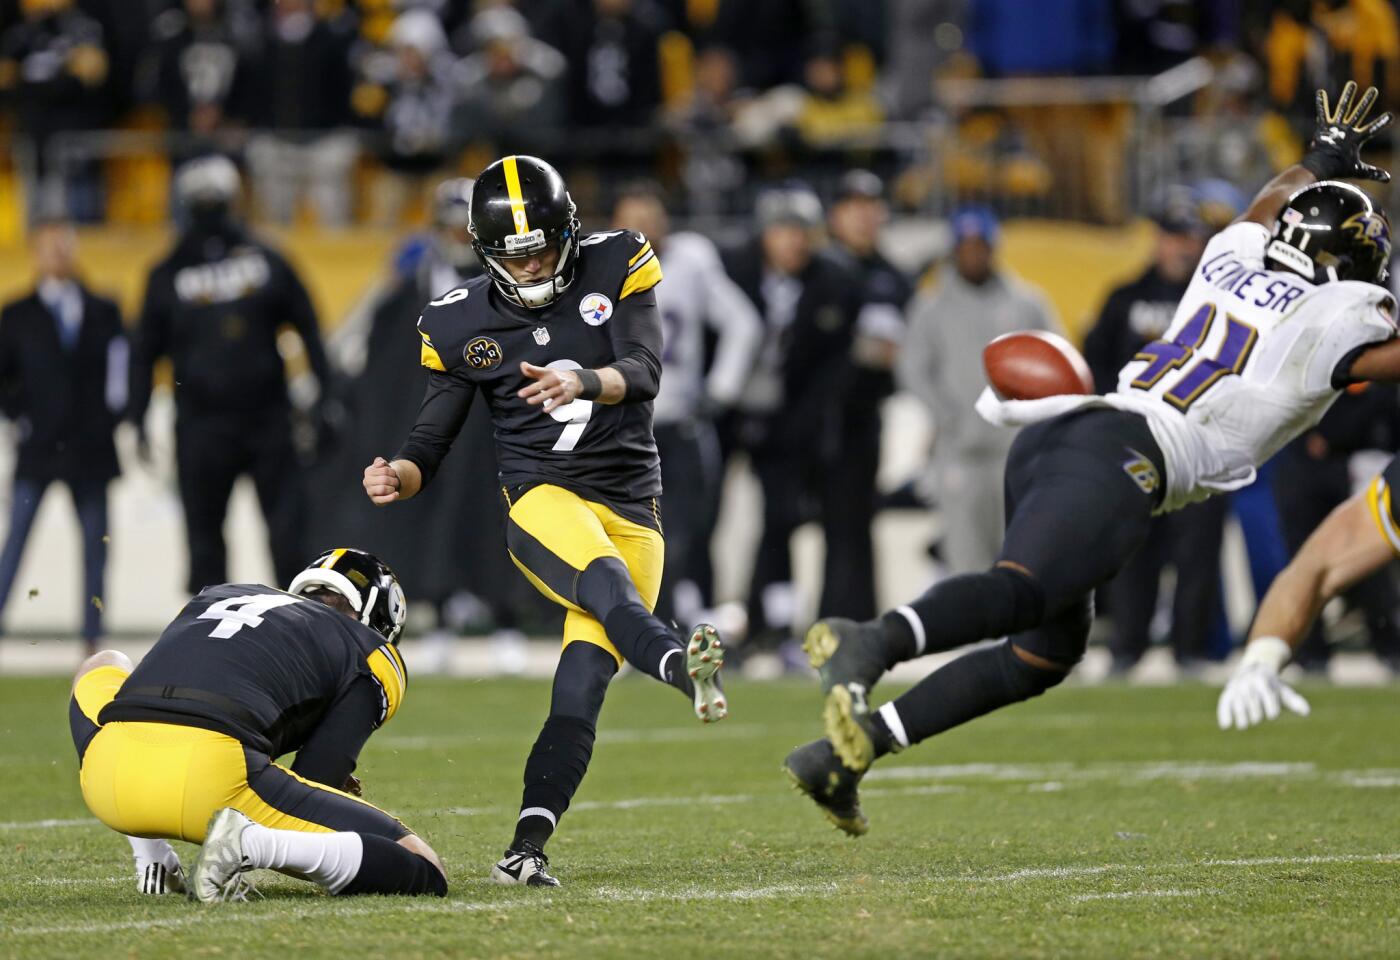 Steelers kicker Chris Boswell kicks a 46-yard game-winning field goal with 42 seconds left against the Ravens in Pittsburgh on Sunday, Dec. 10, 2017. The Steelers won, 39-38, in the highest-scoring game in the history of the rivalry.